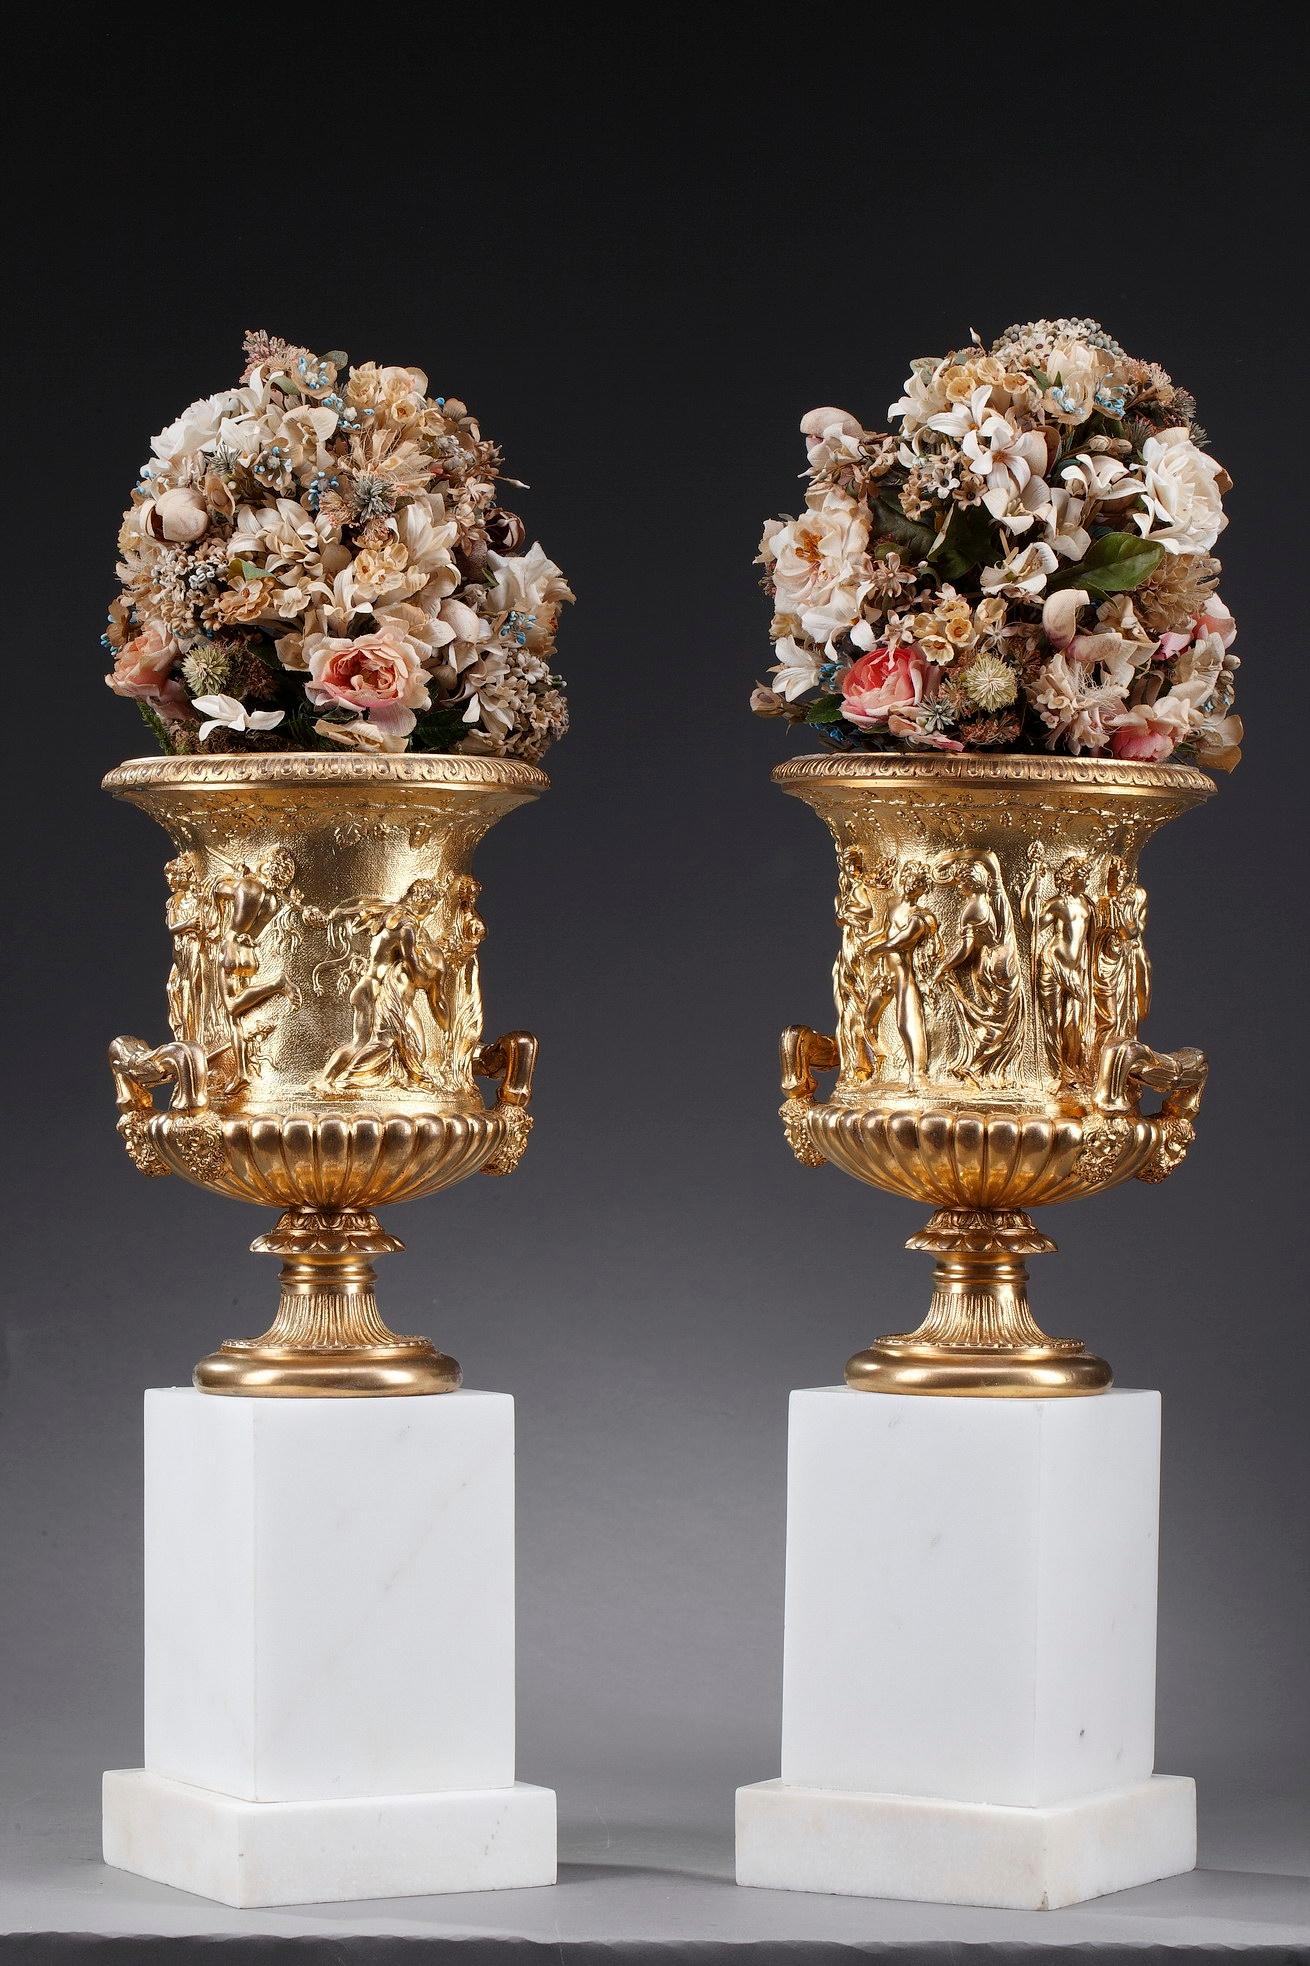 This beautiful pair of ormolu Medici vases depicts a Bacchanalia with young men and women dressed à l'antique, playing and dancing on a matting background adorned with vine branches and grapes. The handles are supported by bearded masks. The